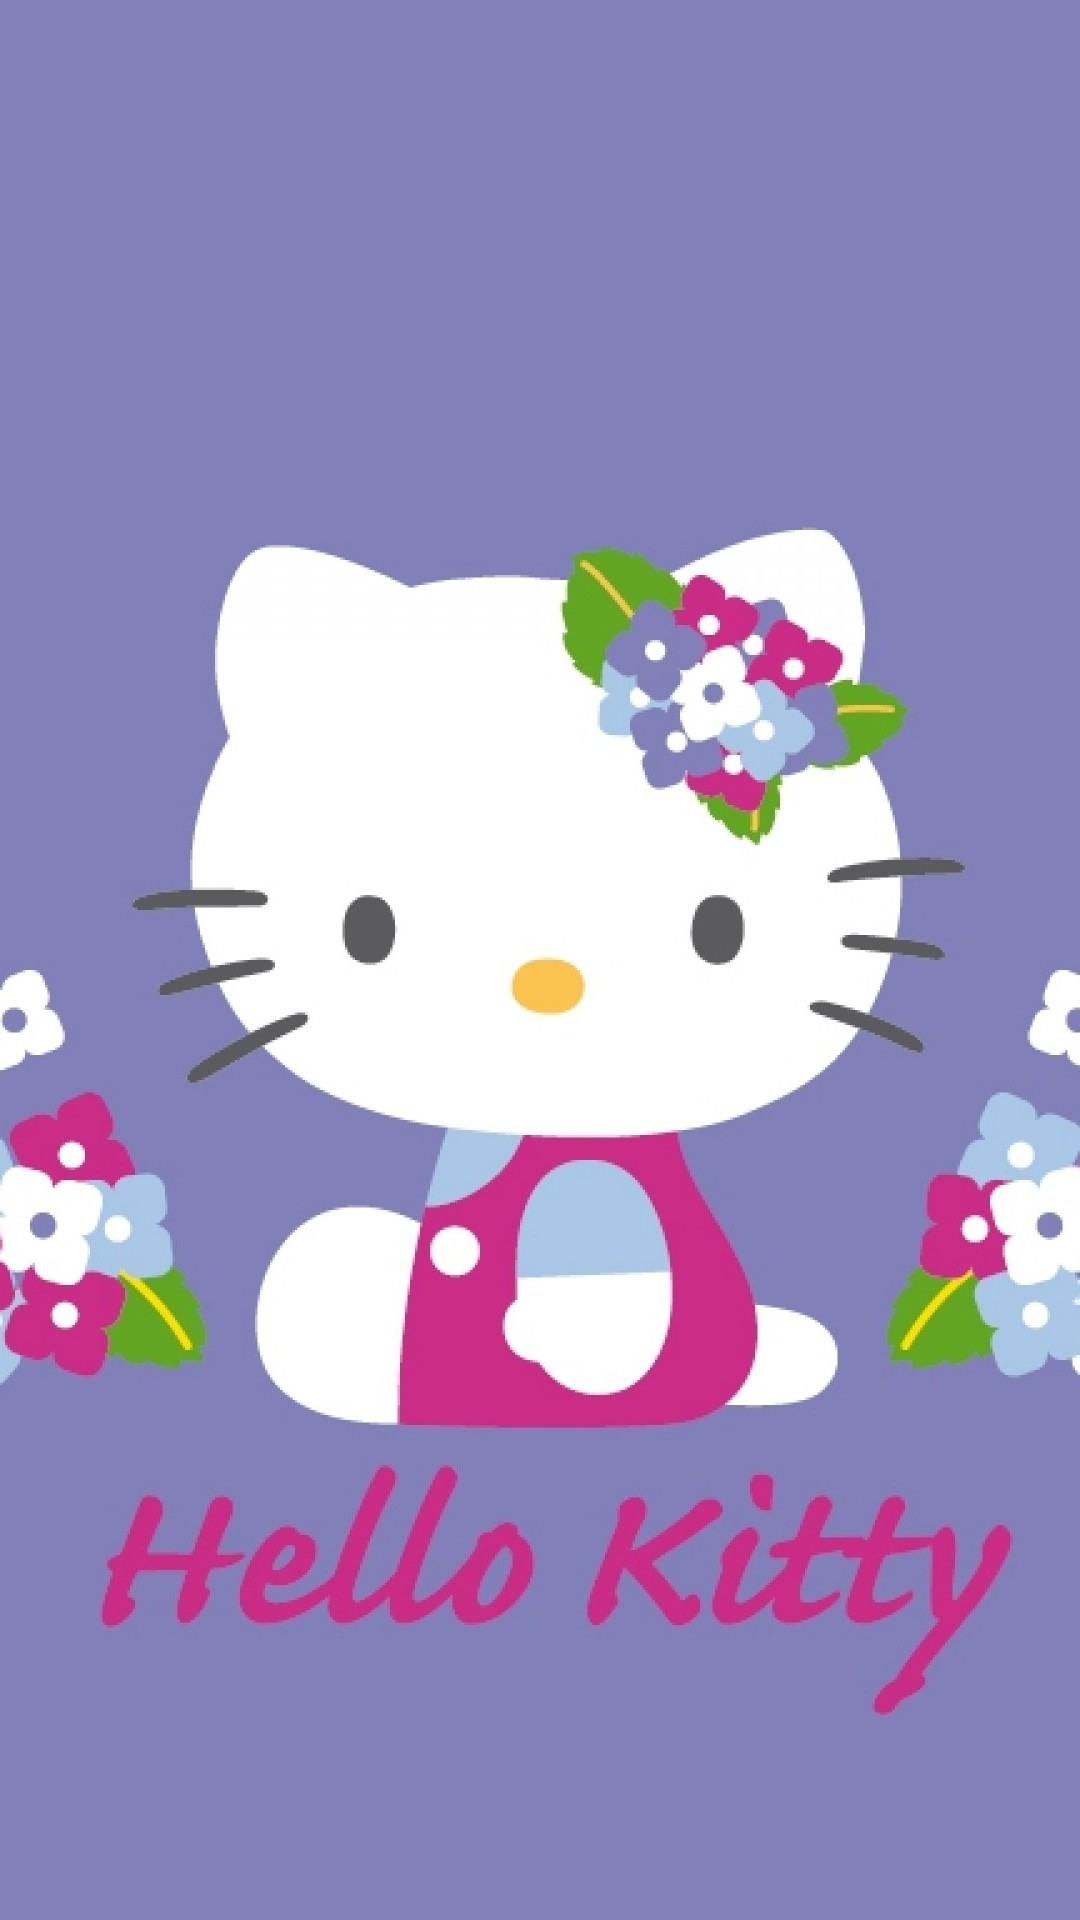 Hello Kitty iPhone 6 Wallpaper with image resolution 1080x1920 pixel. You can use this wallpaper as background for your desktop Computer Screensavers, Android or iPhone smartphones